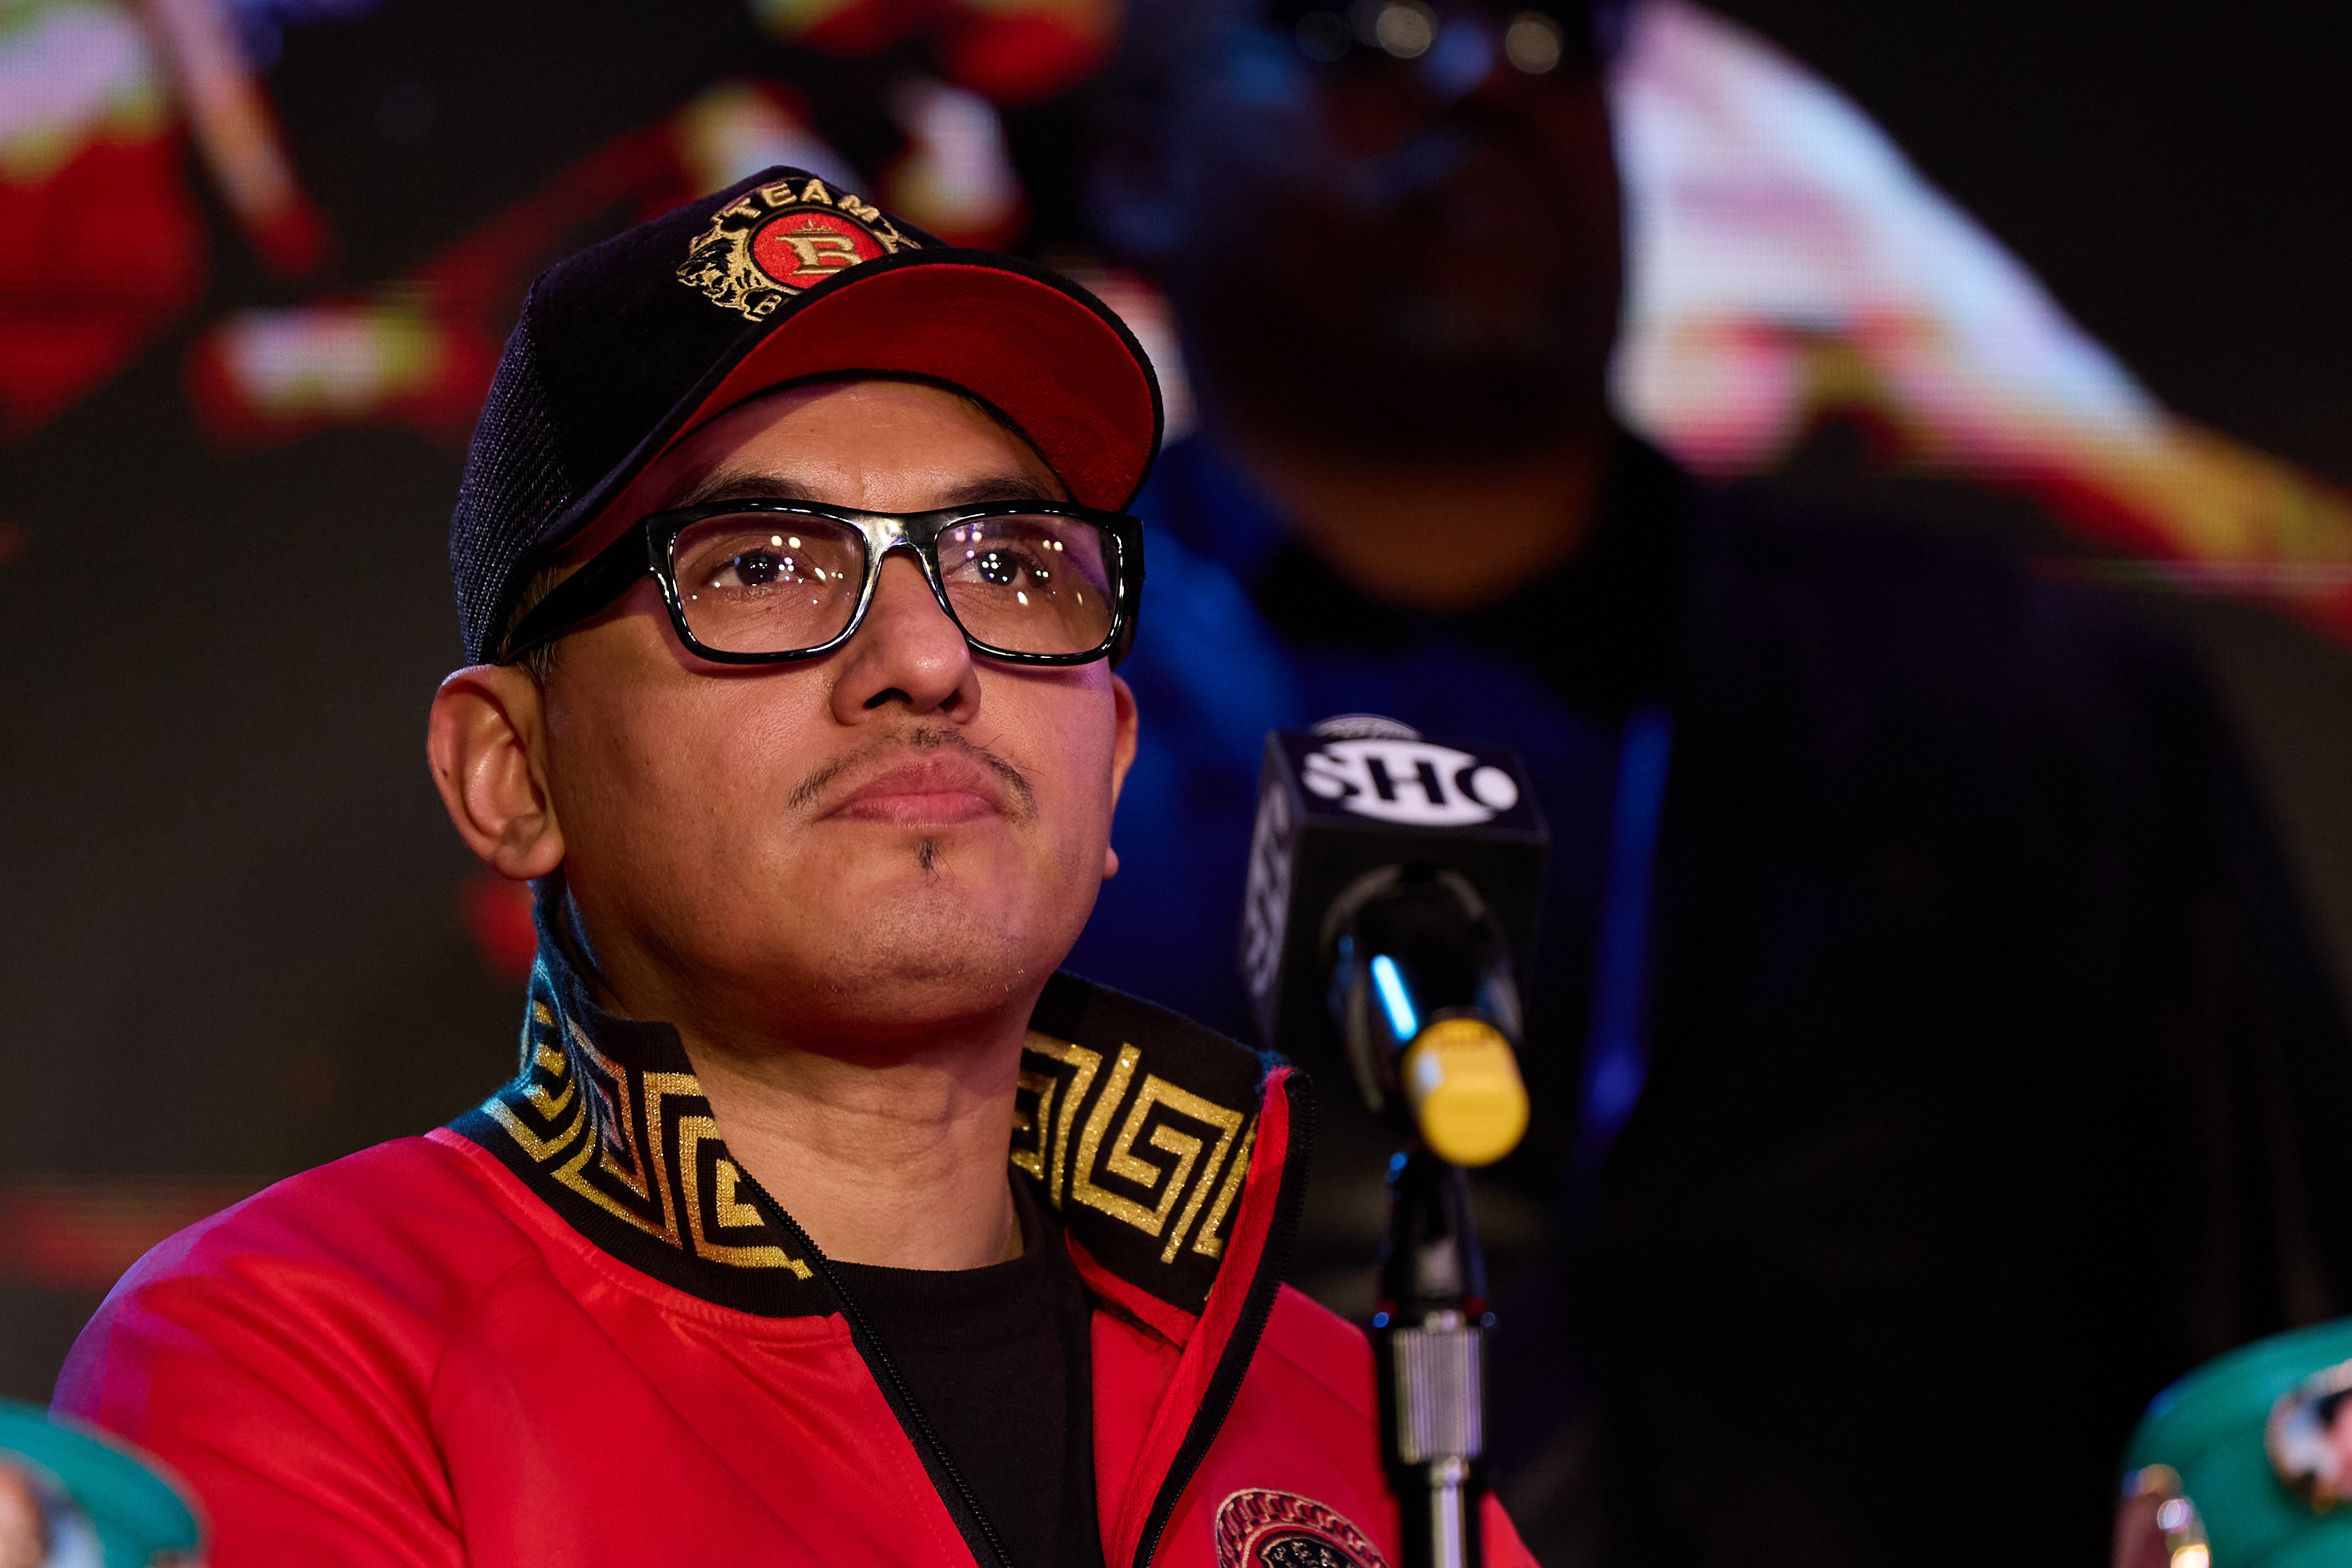 Jose Benavidez Sr says his son won’t change up the style that got him to this big fight.